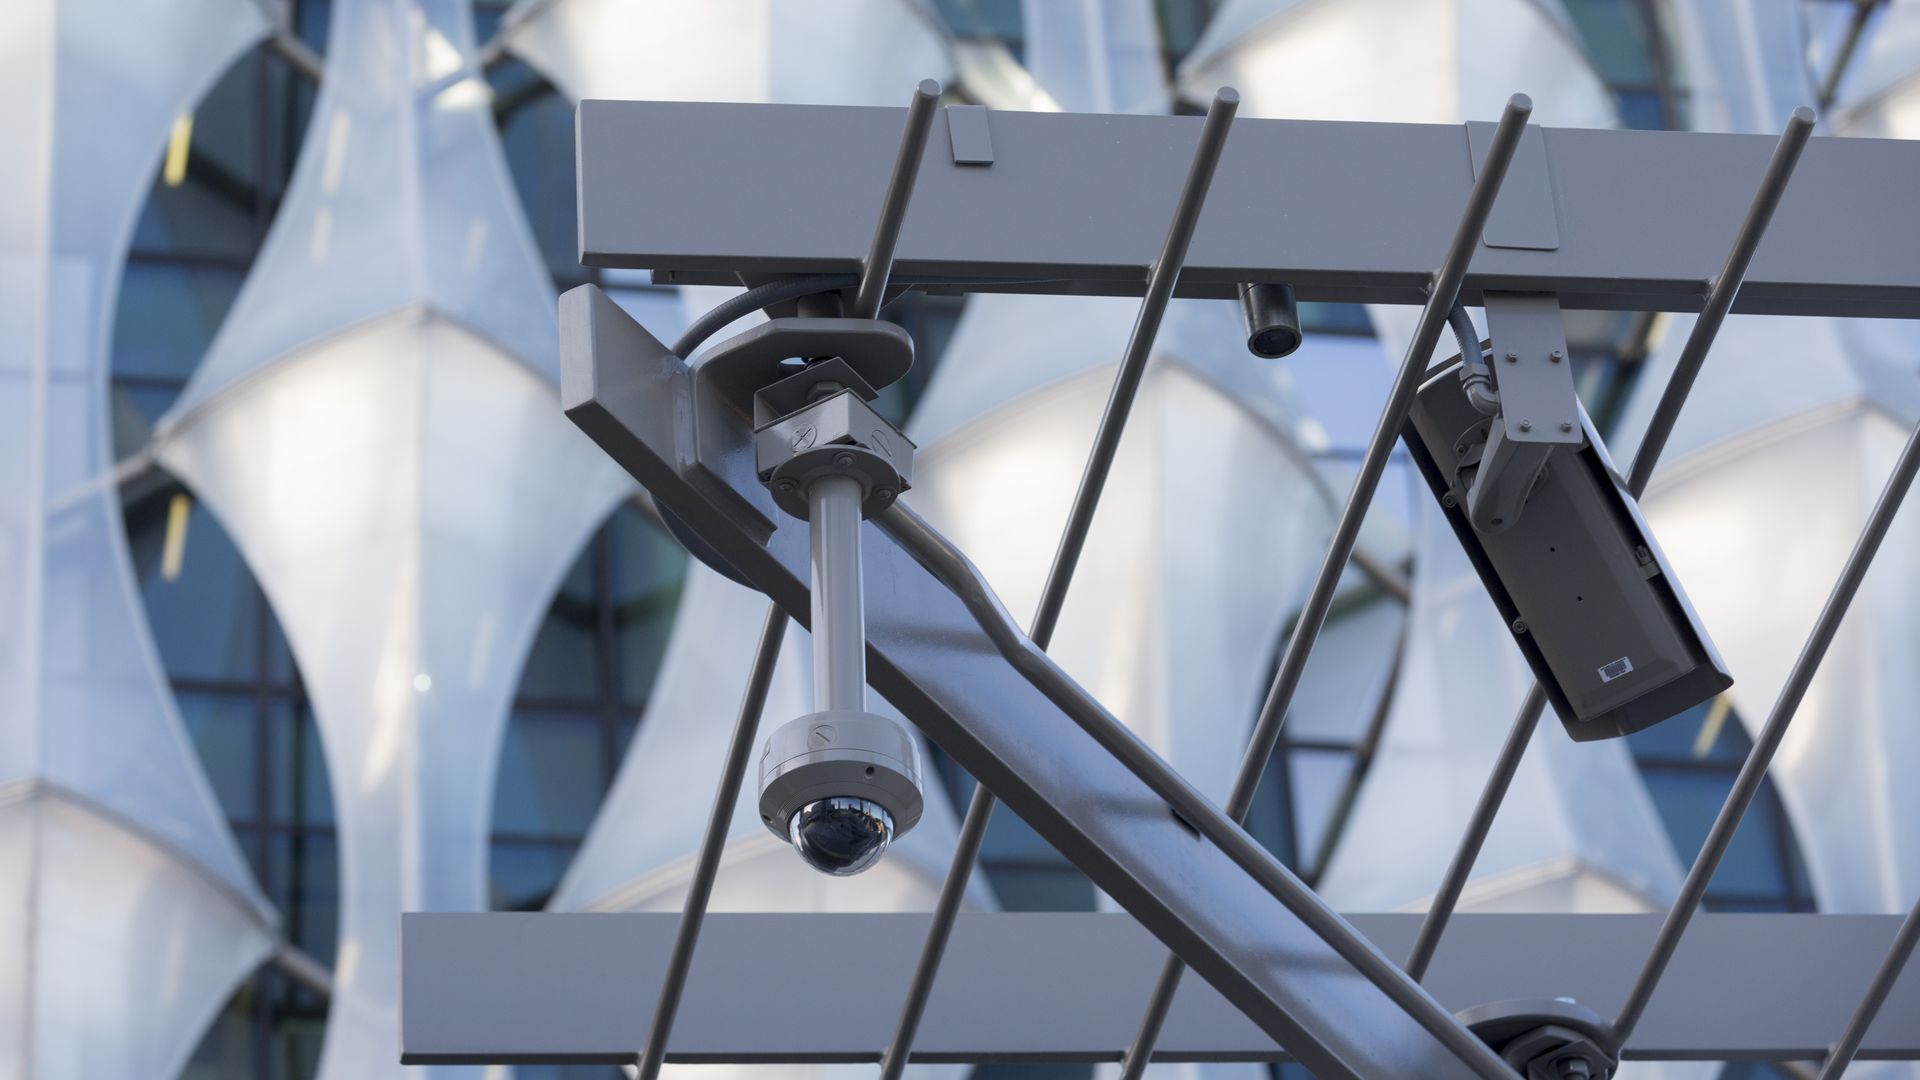 A CCTV camera on the new U.S. Embassy in London